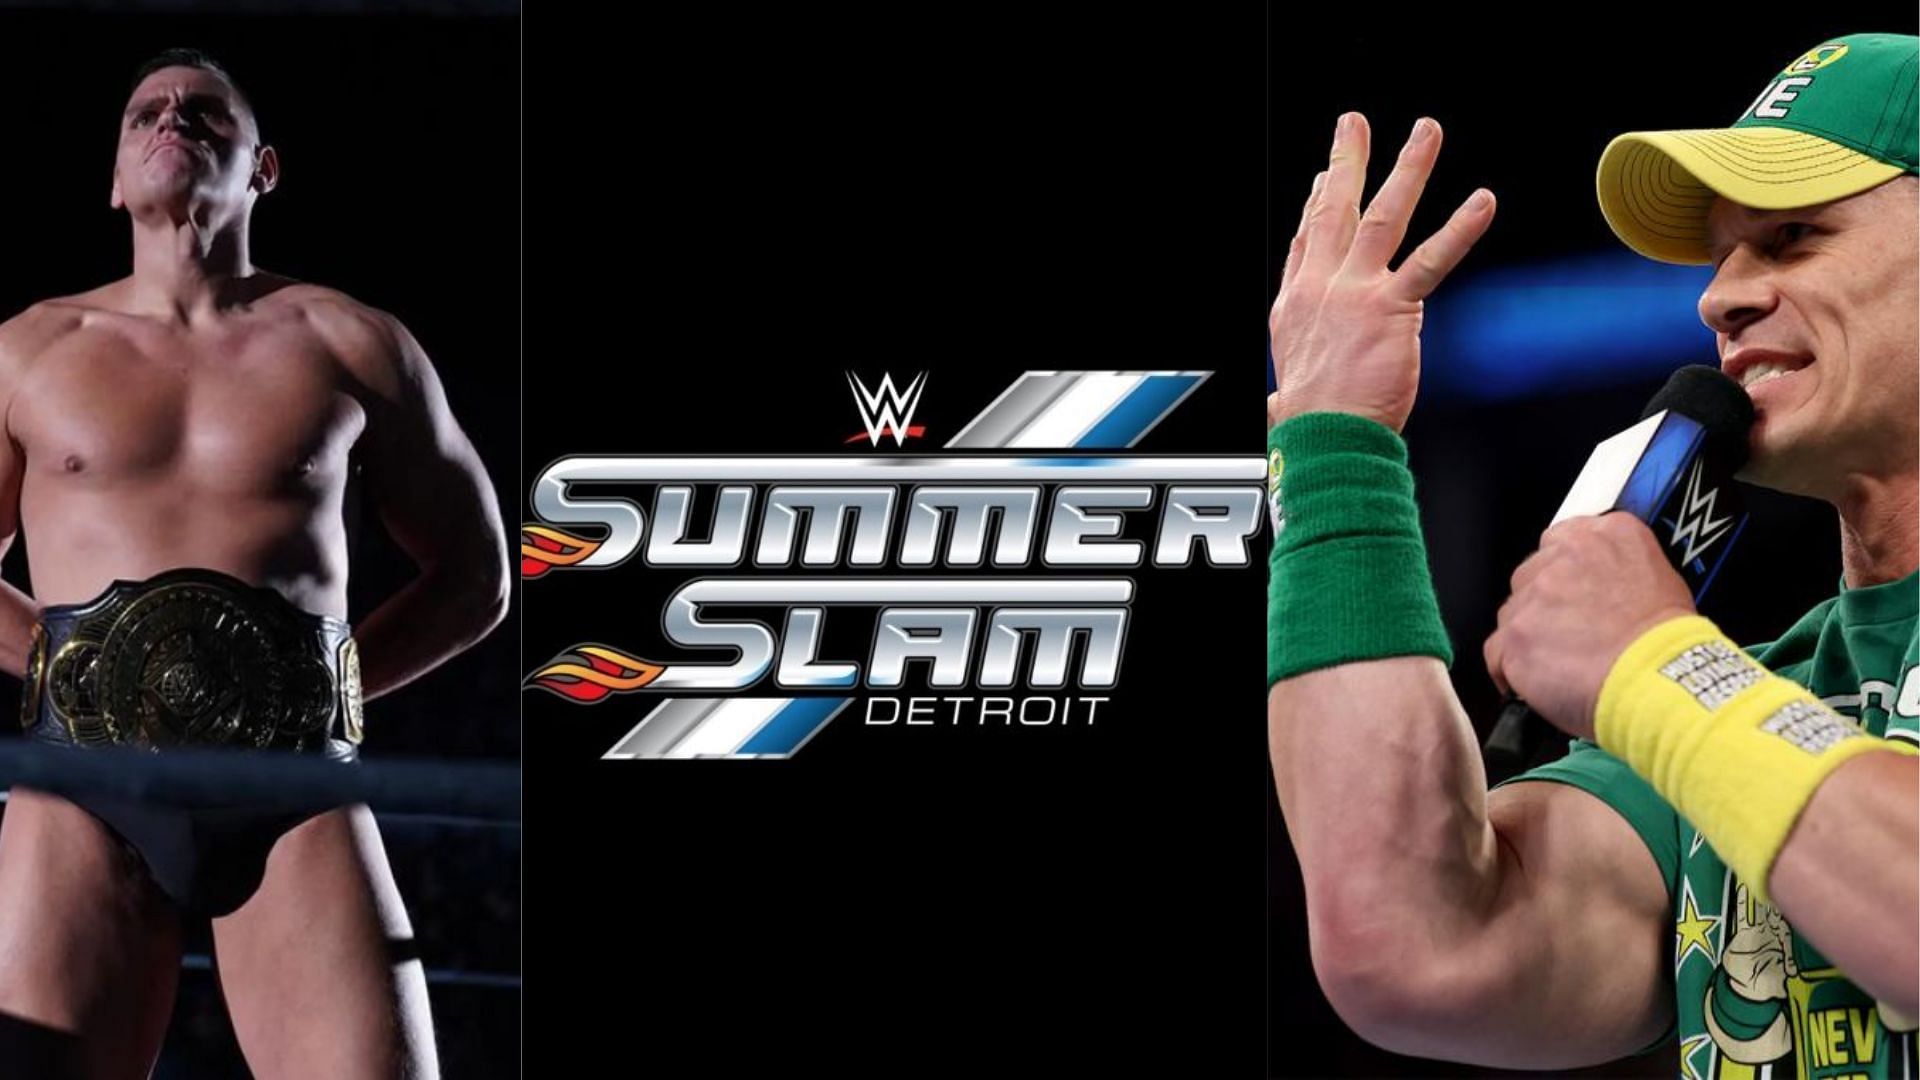 WWE SummerSlam 2023 is set to be a blockbuster event